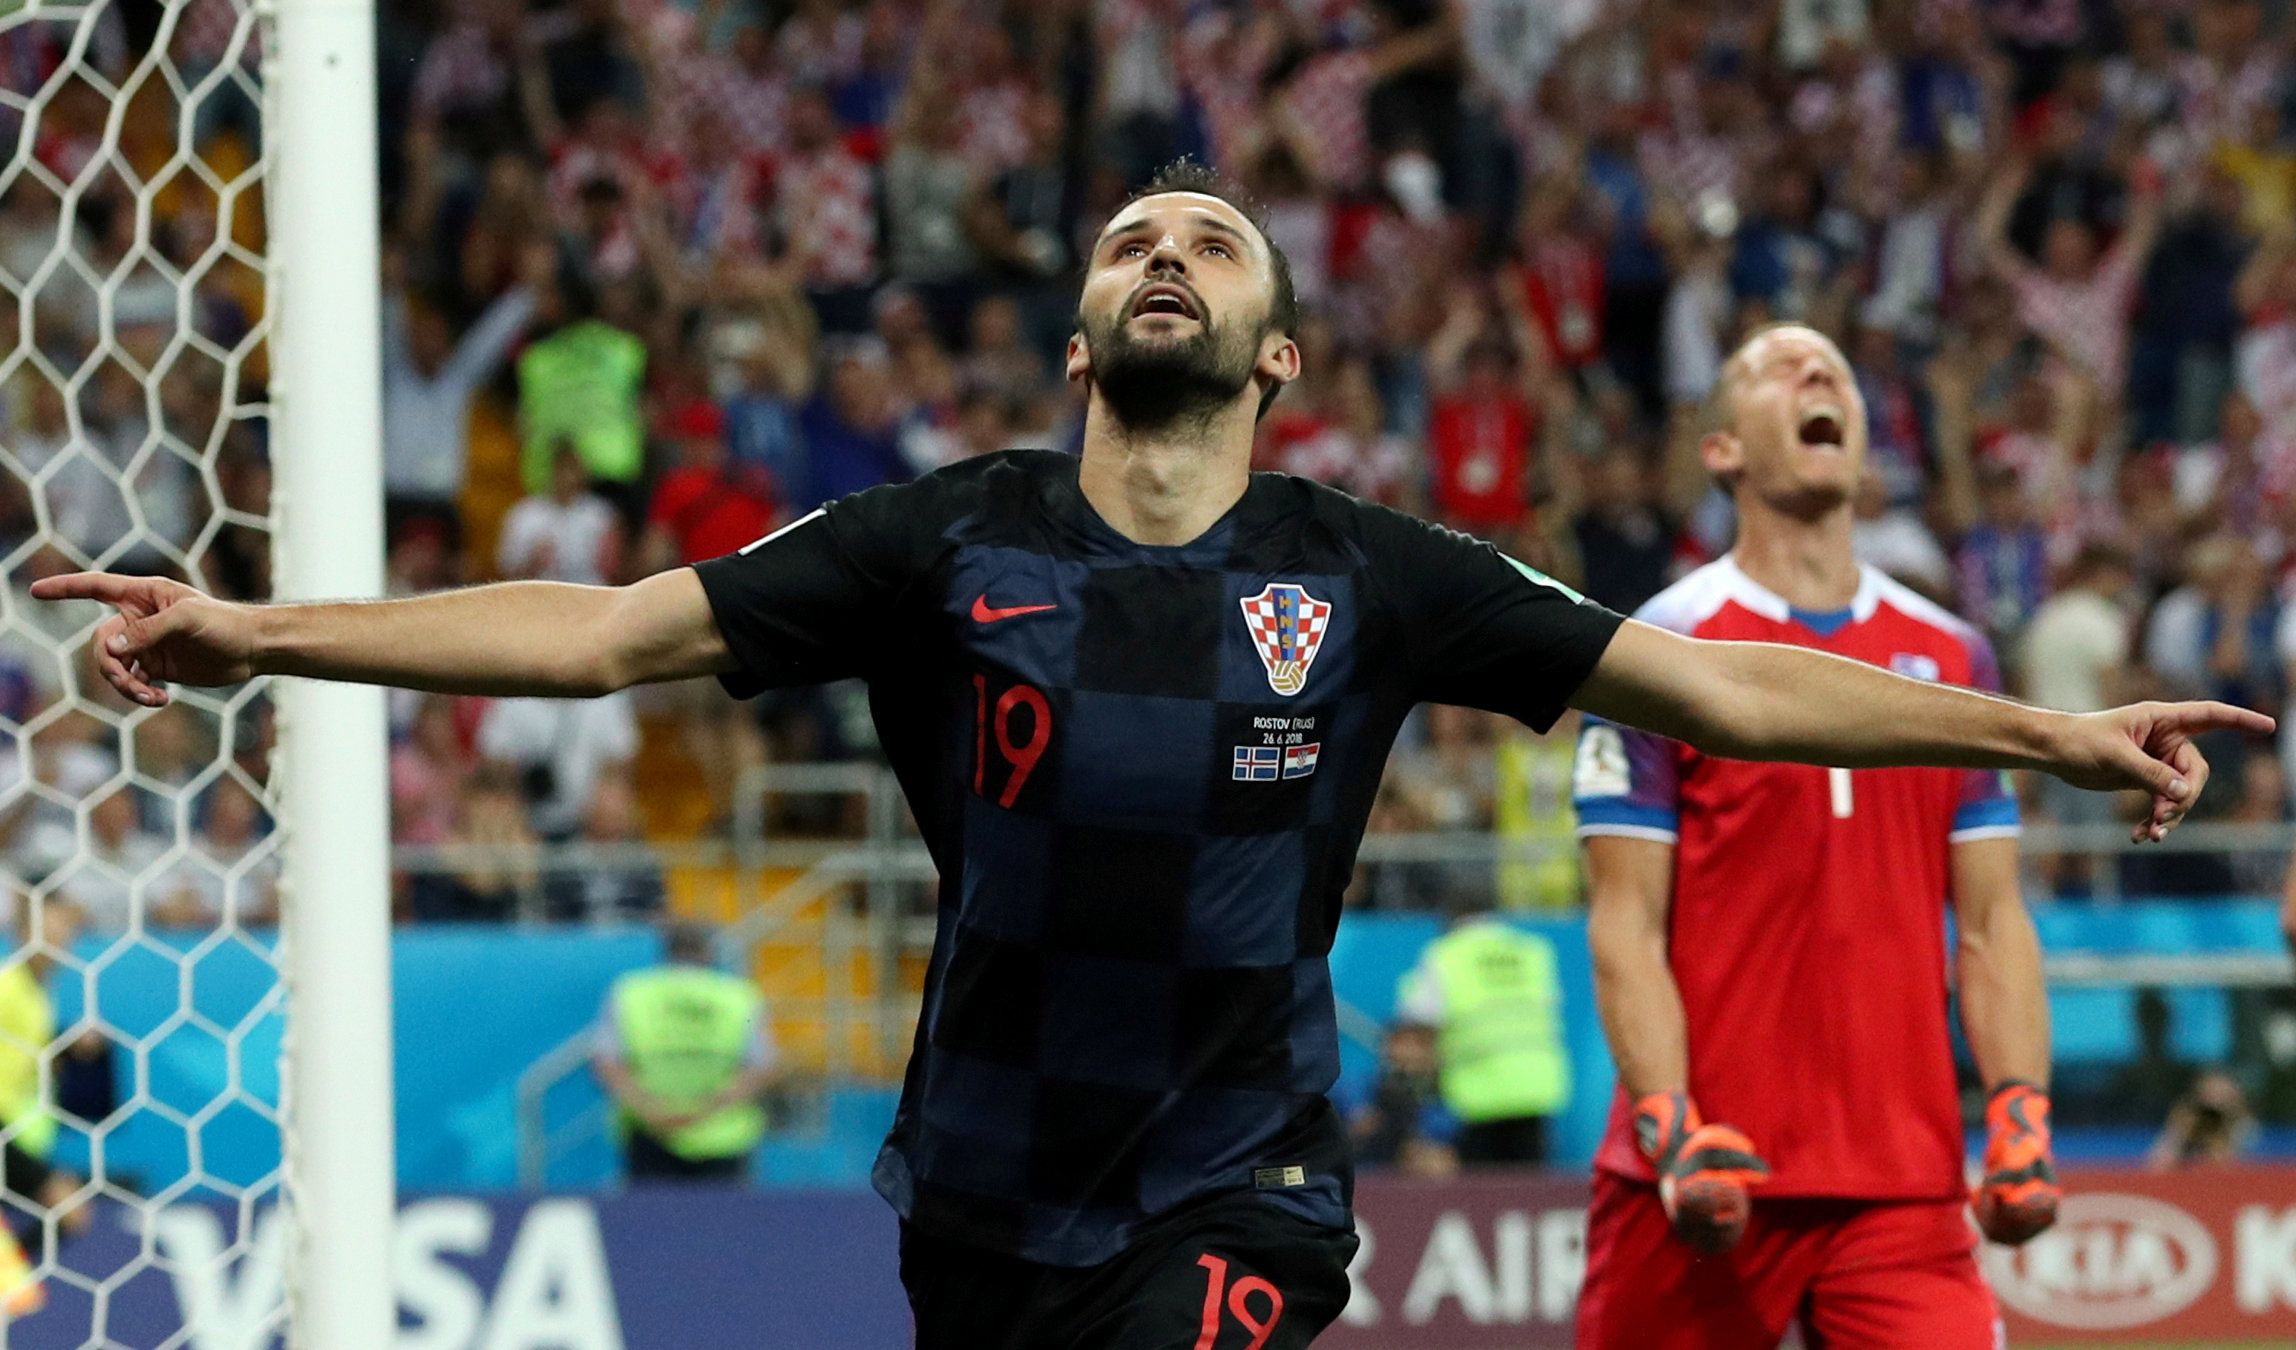 Soccer Football - World Cup - Group D - Iceland vs Croatia - Rostov Arena, Rostov-on-Don, Russia - June 26, 2018   Croatia's Milan Badelj celebrates scoring their first goal    REUTERS/Albert Gea     TPX IMAGES OF THE DAY